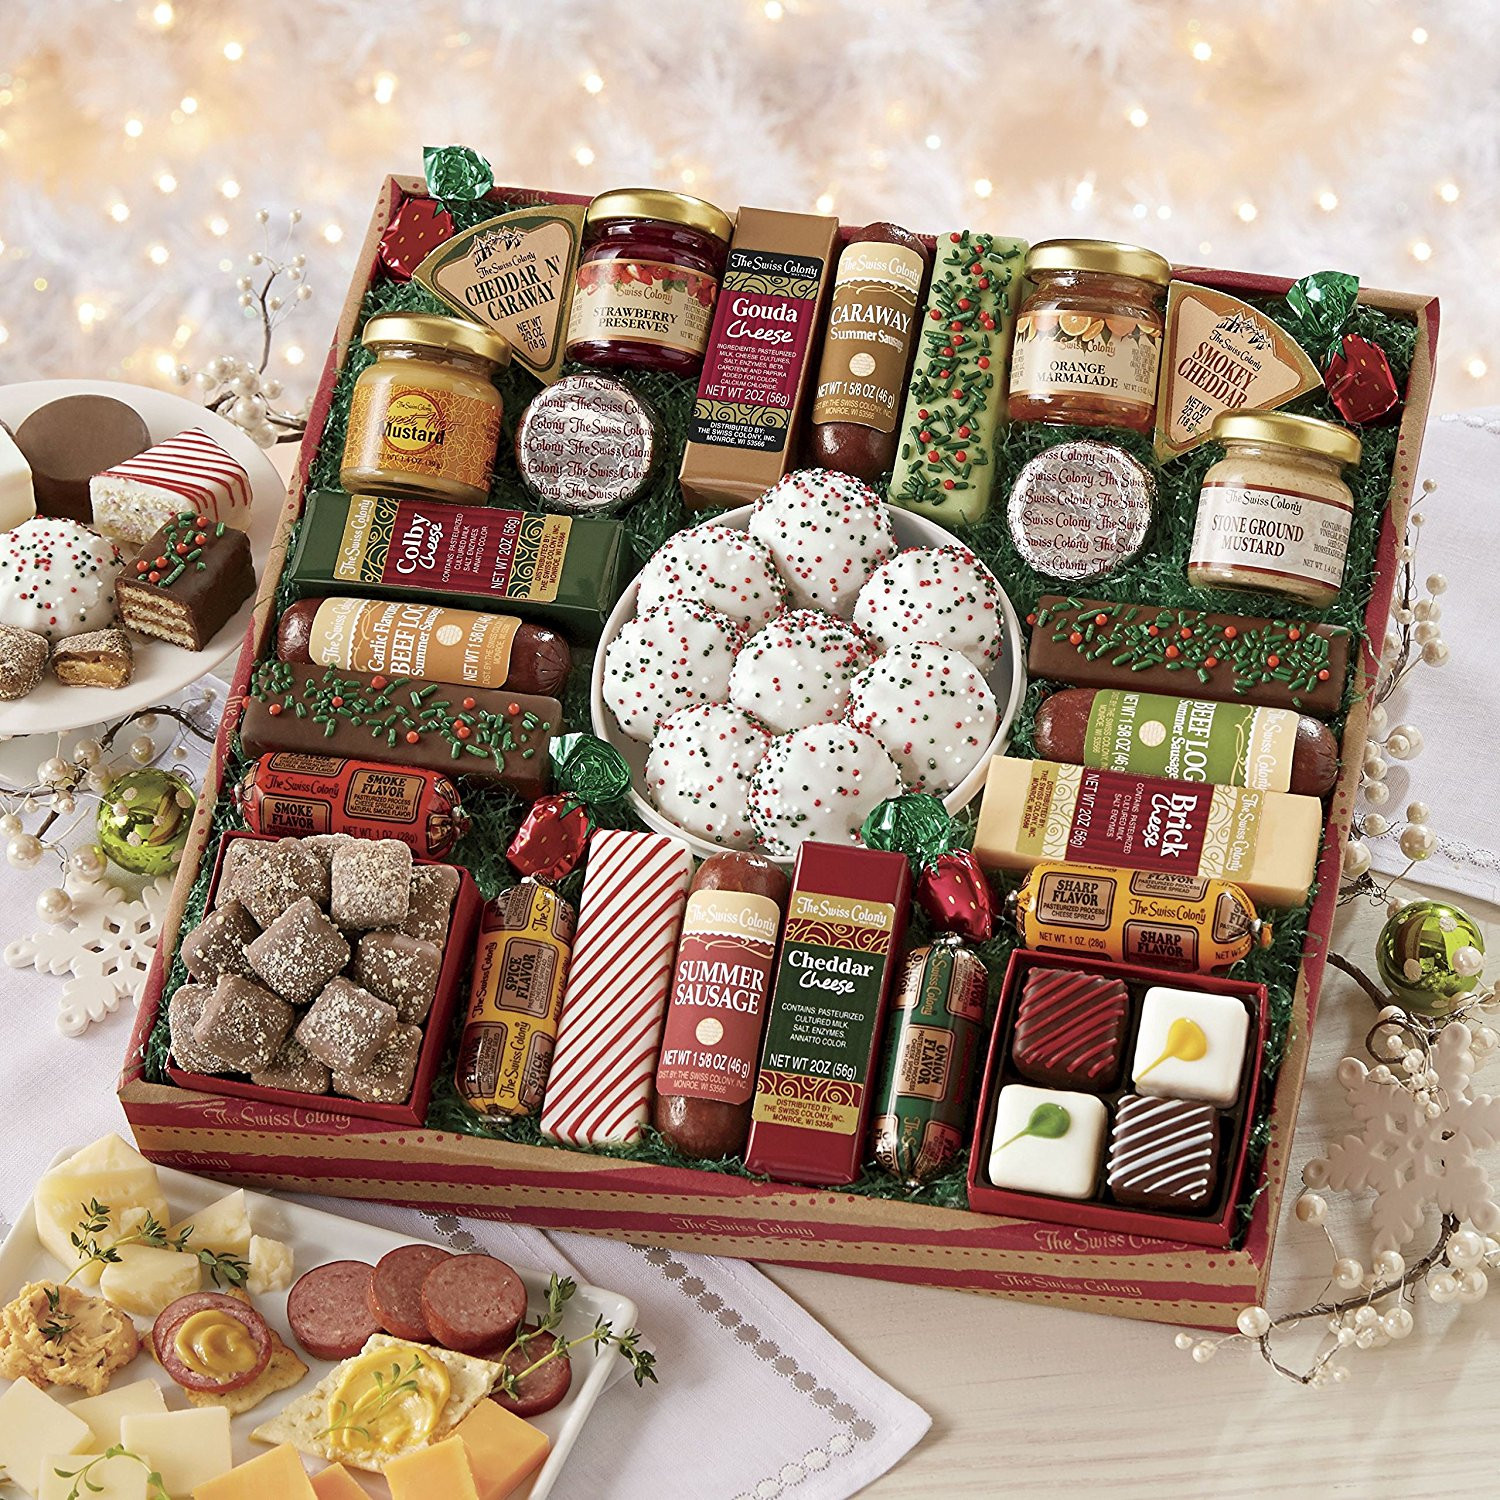 Best Gourmet Food Gifts Beautiful Gourmet Food Gift Baskets Best Cheeses Sausages Meat